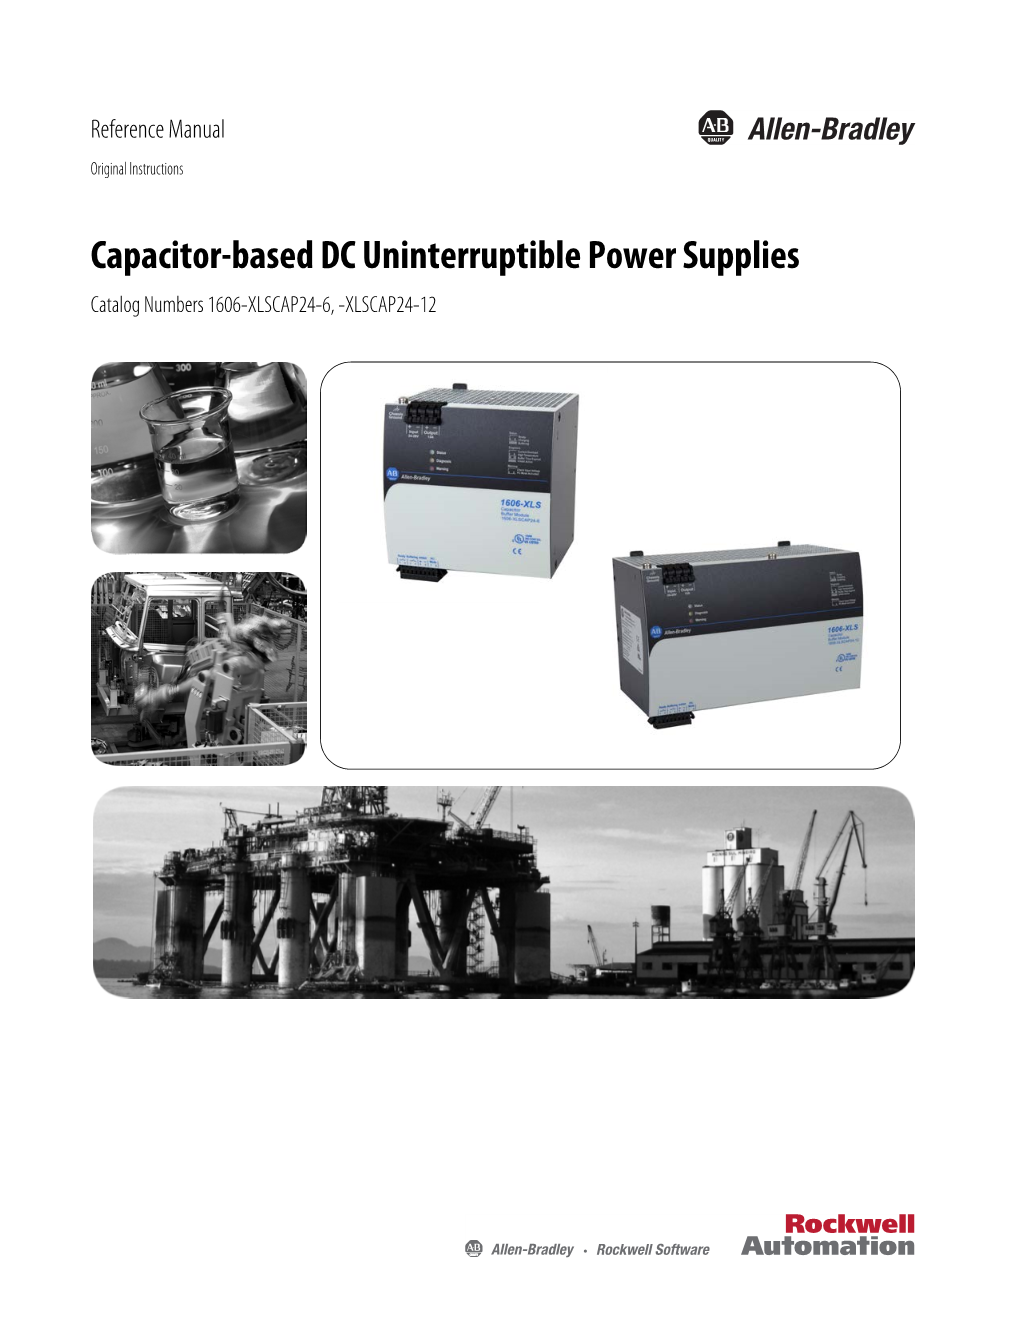 Capacitor-Based DC Uninterruptible Power Supplies Catalog Numbers 1606-XLSCAP24-6, -XLSCAP24-12 Important User Information